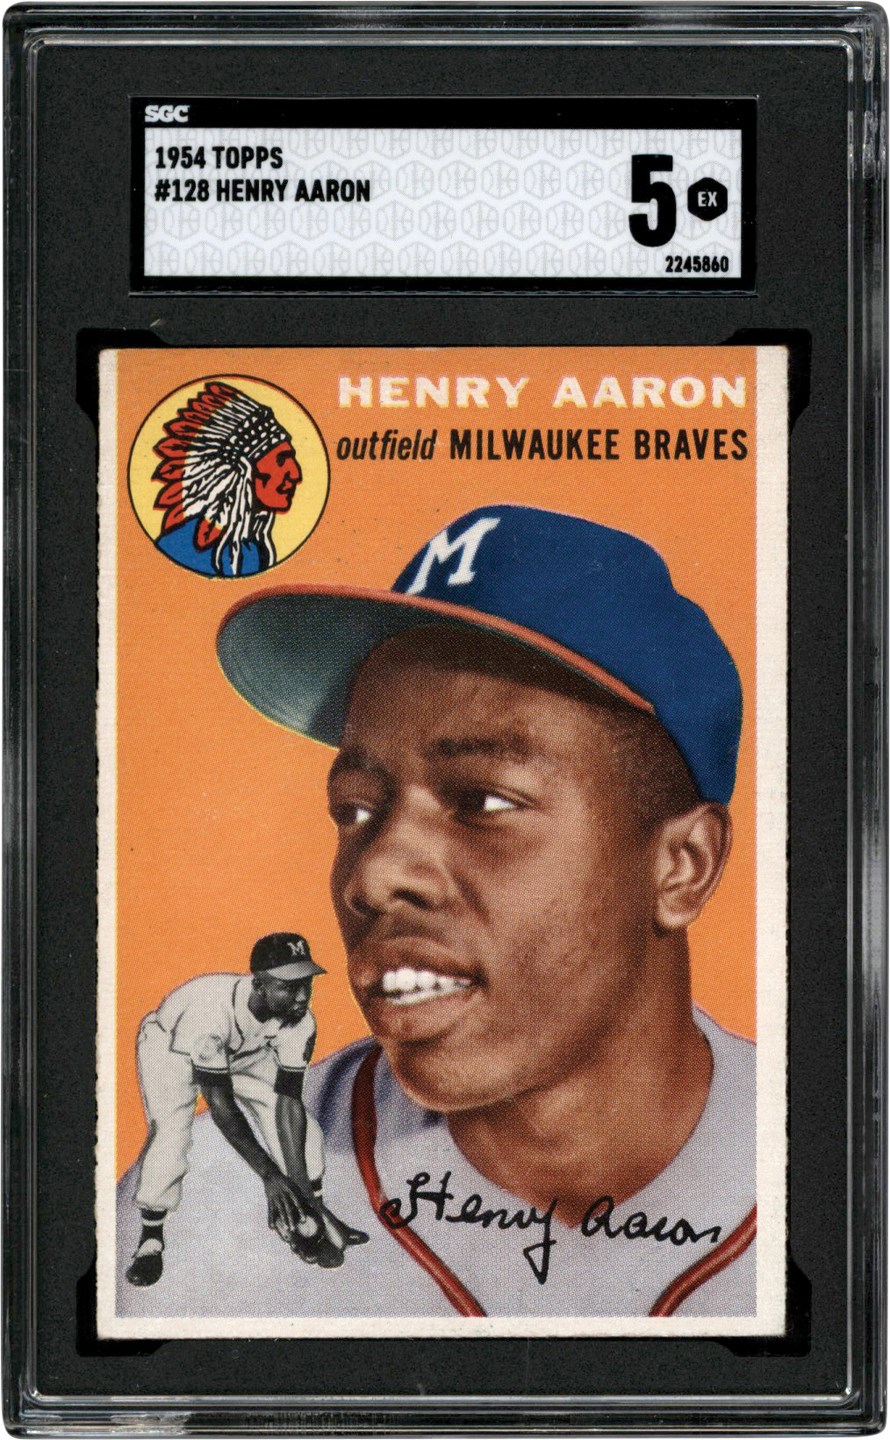 Baseball and Trading Cards - 1954 Topps #128 Hank Aaron Rookie Card SGC EX 5